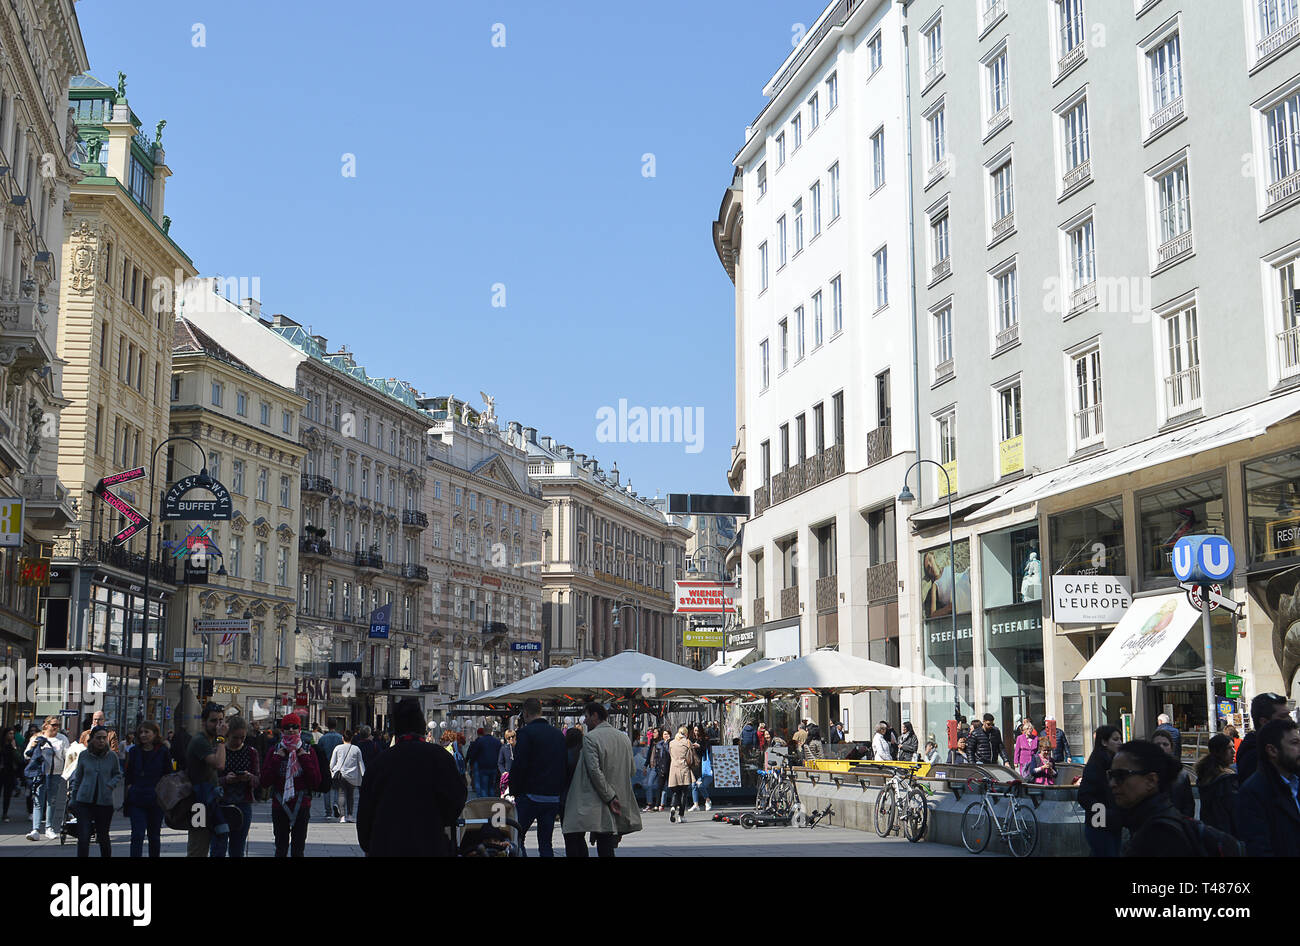 VIENNA, AUSTRIA - 1 APRIL 2019: Dating back to Roman times, the Graben is one of Vienna's most famous streets offering cafes, restaurants and some of  Stock Photo